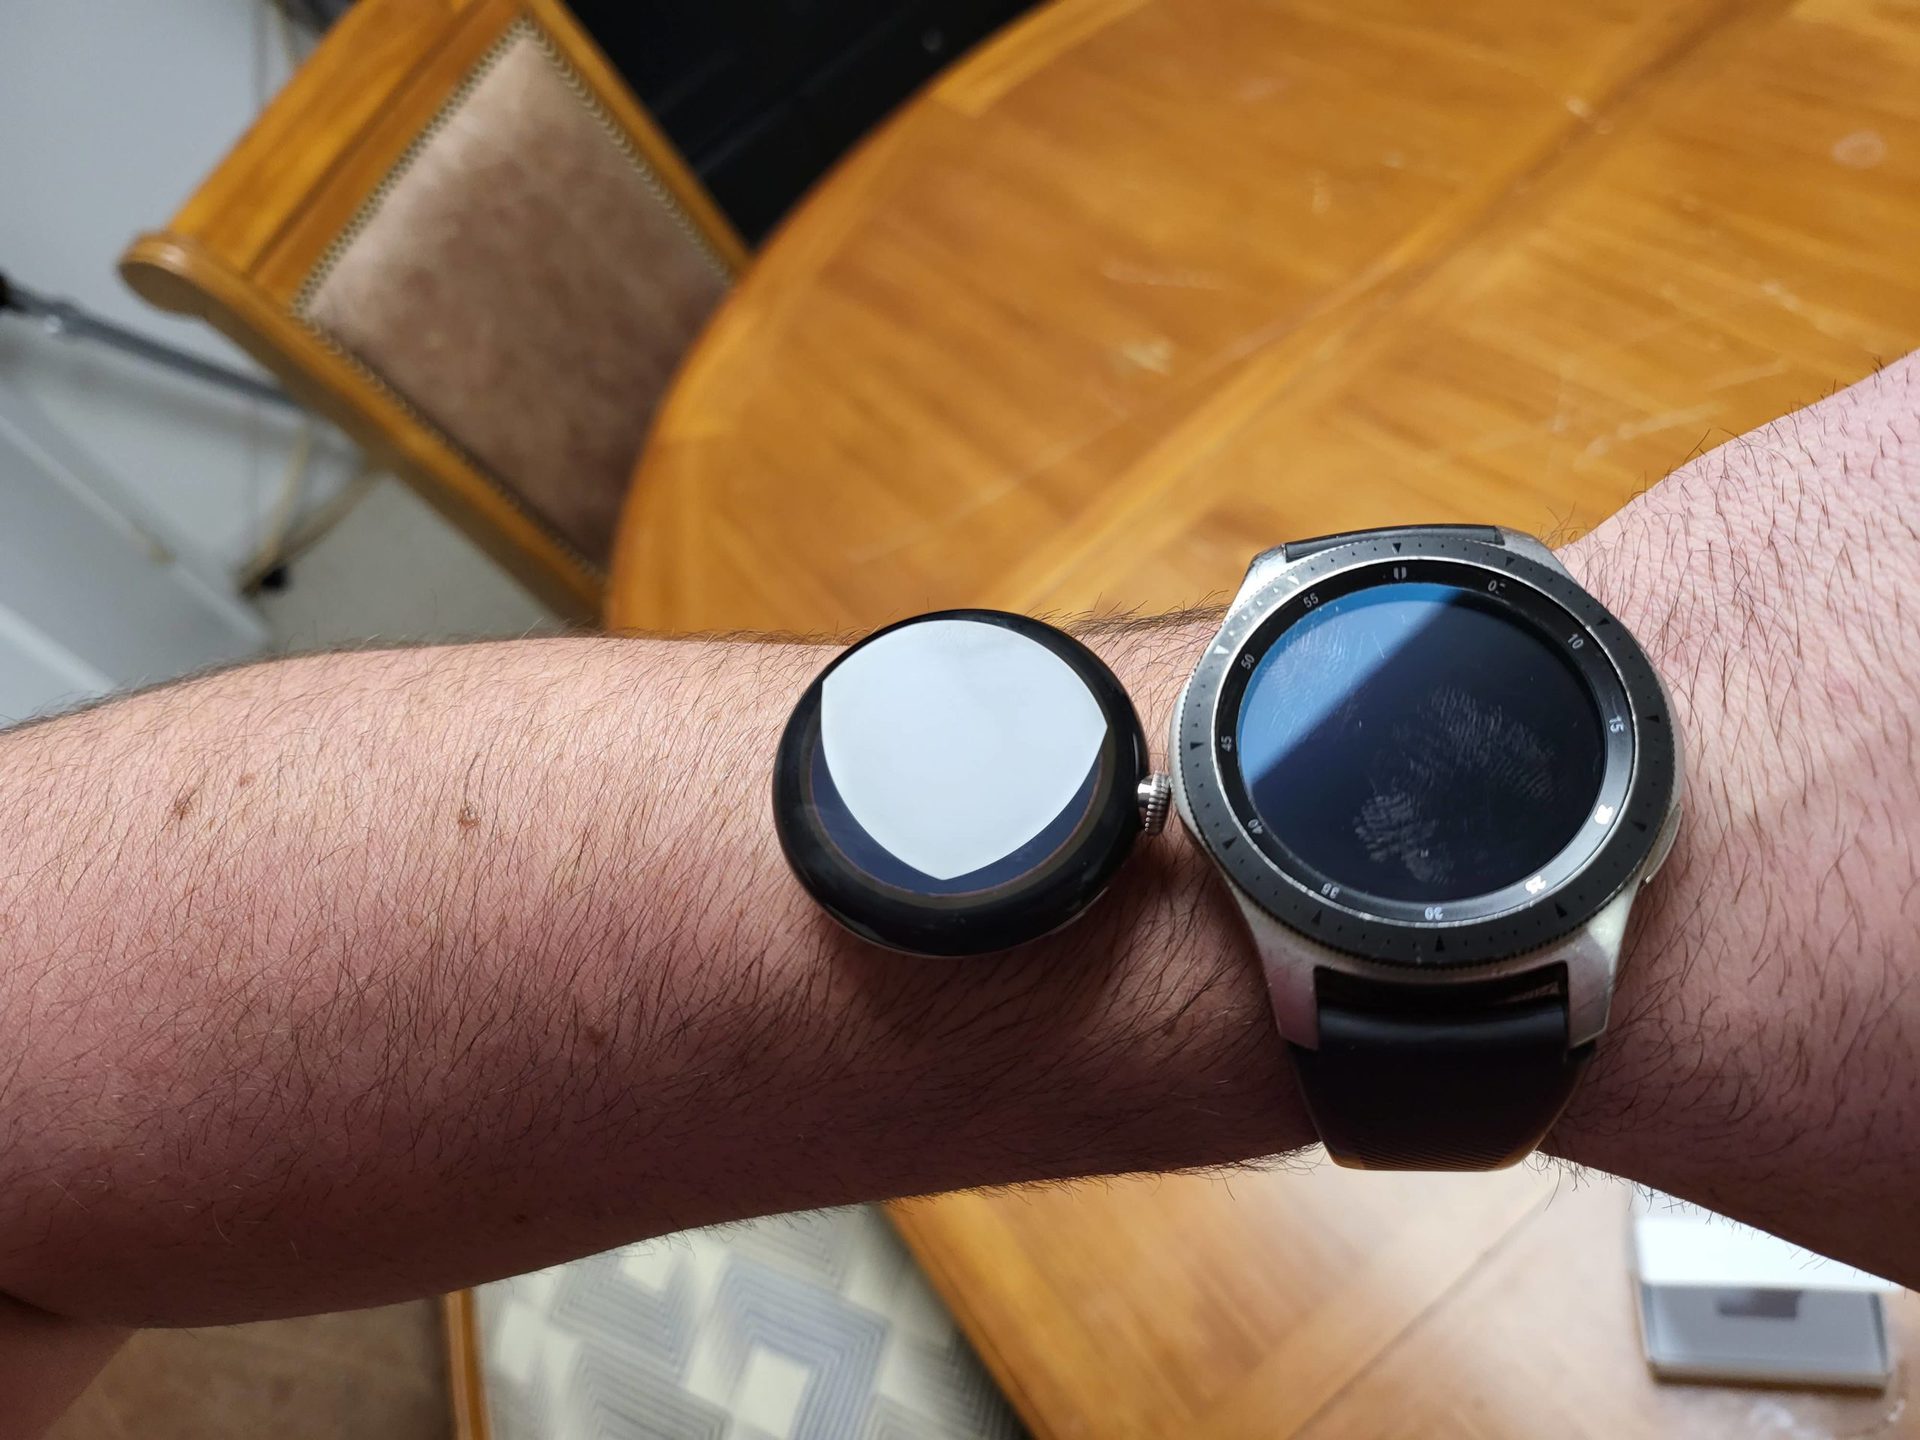 Here's the leaked Pixel Watch next to an Apple Watch, Galaxy Watch